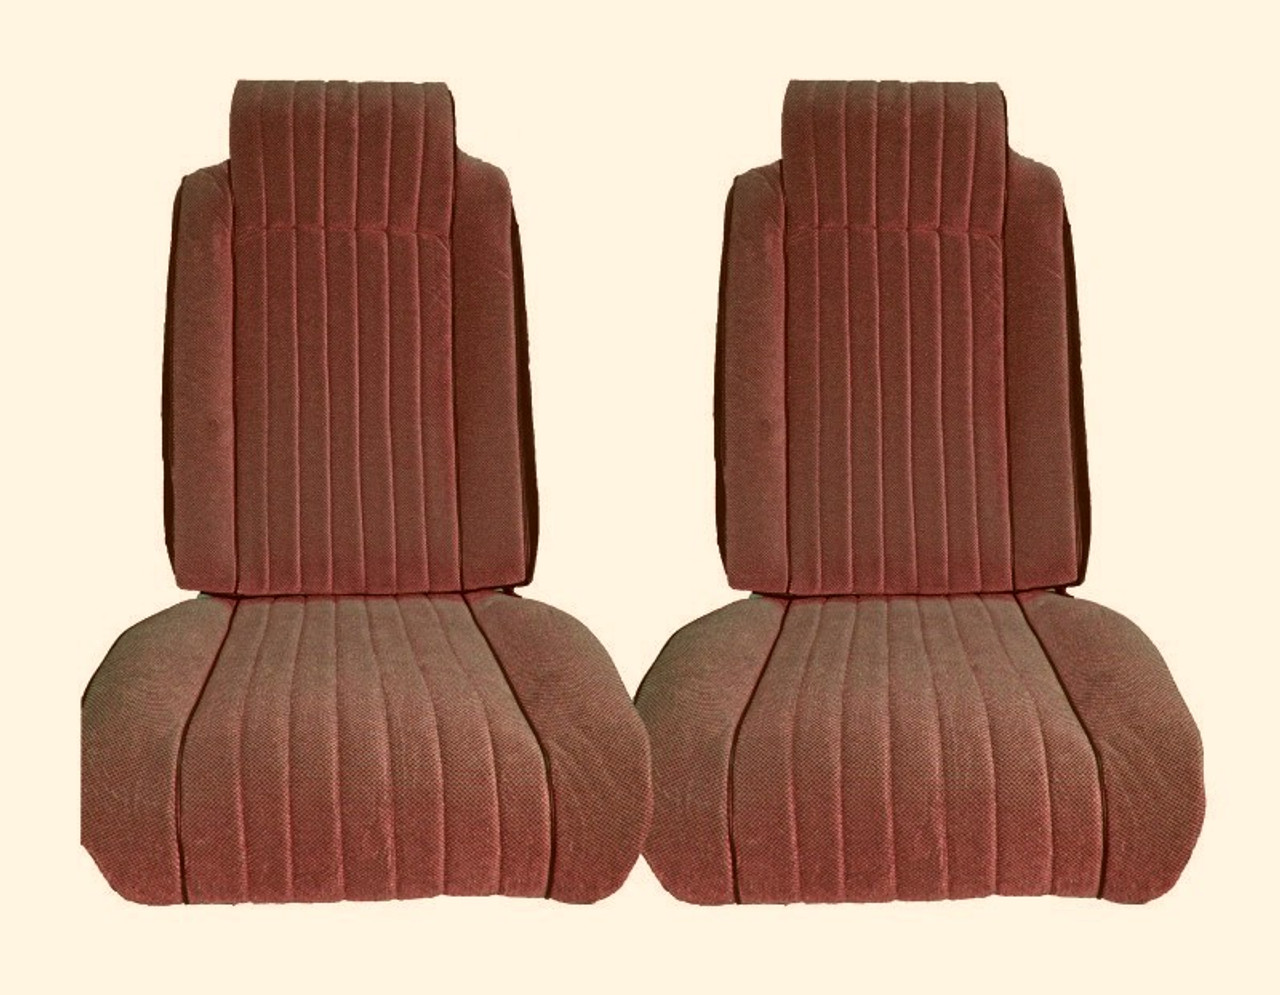 1981-1988 Monte Carlo Seat upholstery front and rear in your choice of color from available colors